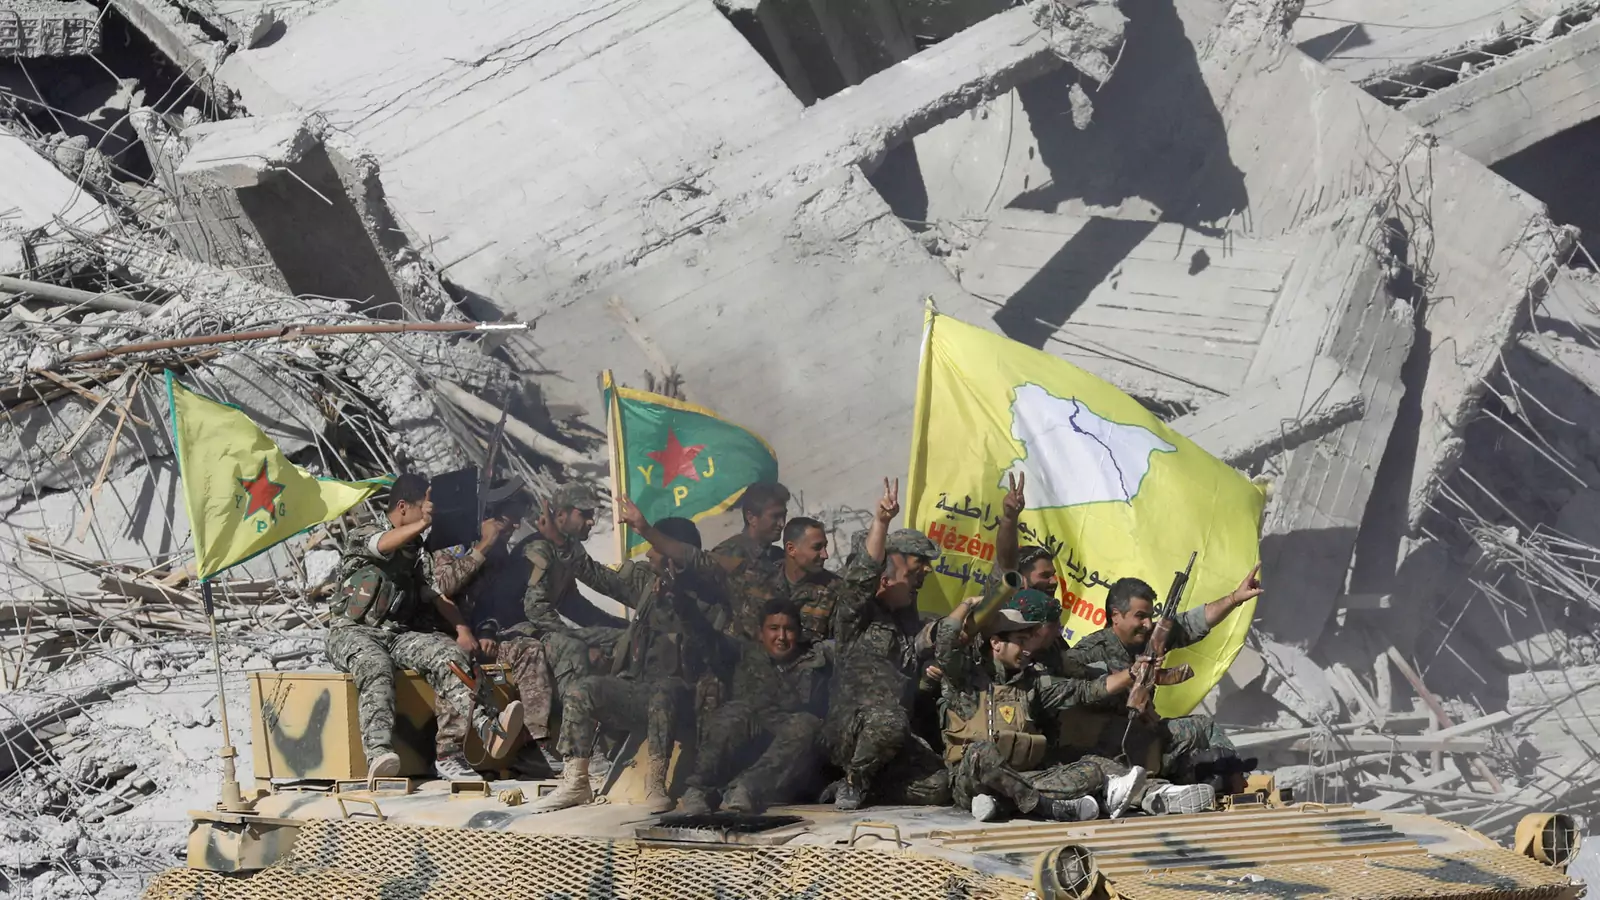 Syrian Democratic Forces fighters celebrate victory in Raqqa.